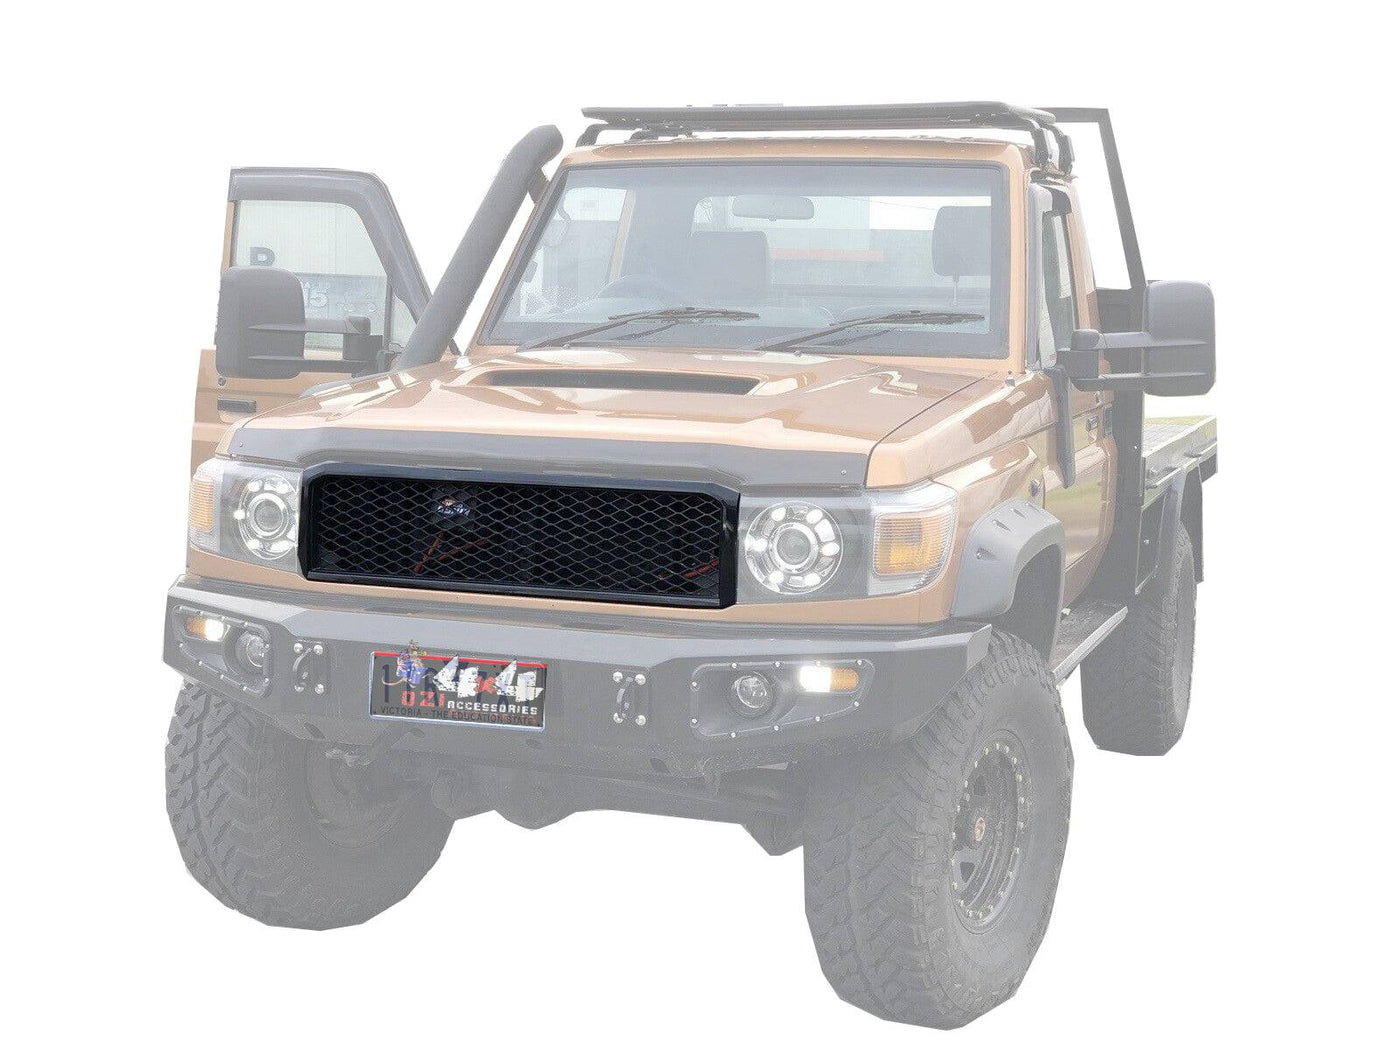 Black Honey Combe Mesh Grill Suitable For Toyota Landcruiser 79,78,76 Series 2007+ (Online Only) - OZI4X4 PTY LTD